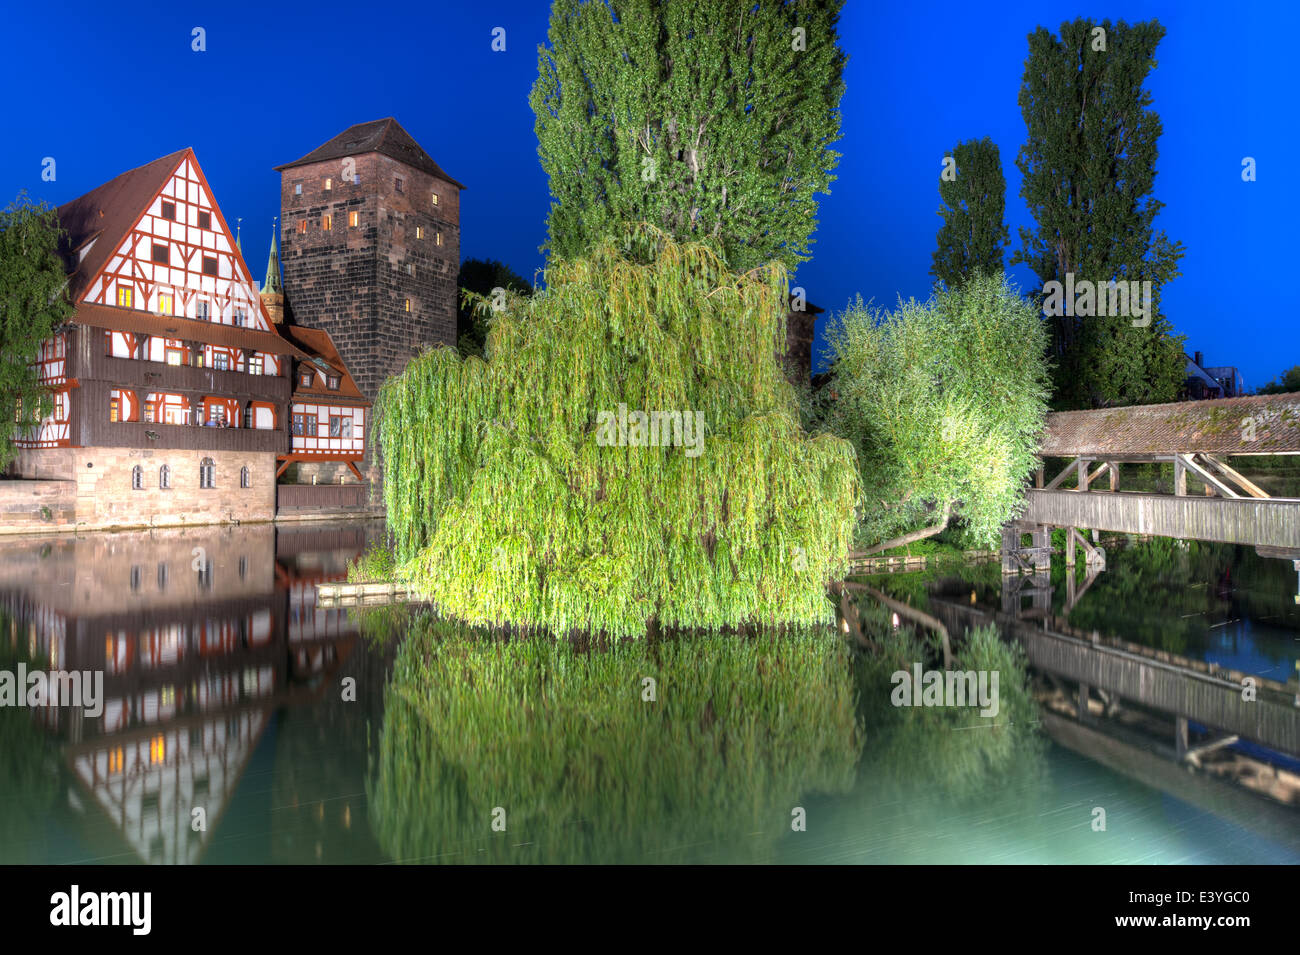 From left to right, the famous Weinstadel, Wasserturm (Water Tower) and Henkersteg (Hangman's Bridge) over the river Pegnitz. Stock Photo